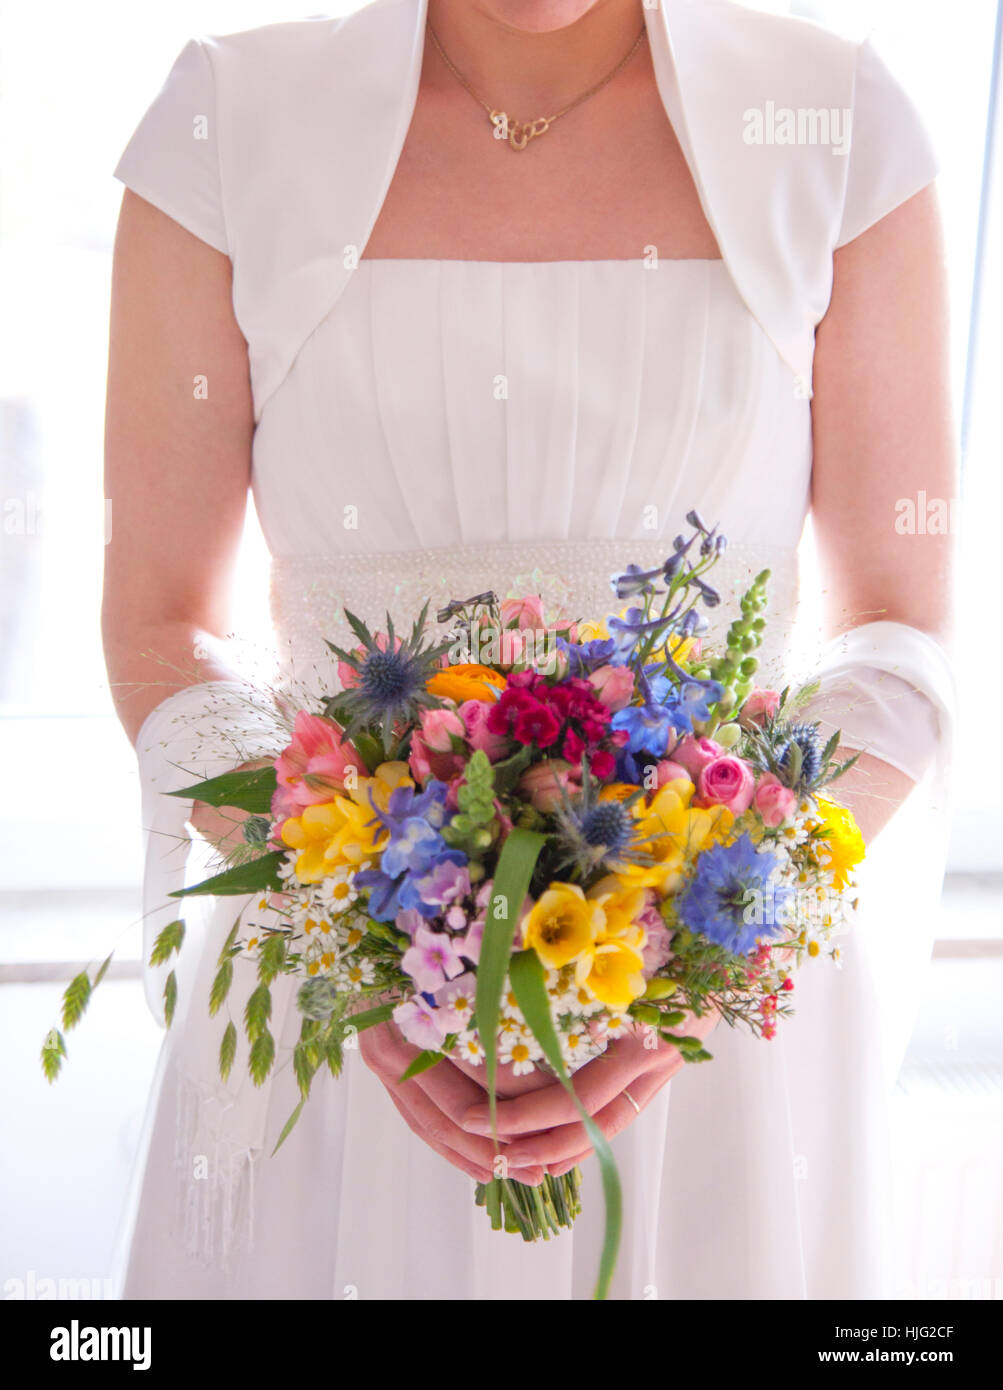 Bride,bridal gown,bridal bouquet,standing,wedding day,wedding,groom,marriage,marriage promises,forever,most beautiful,Hand,Hands Stock Photo